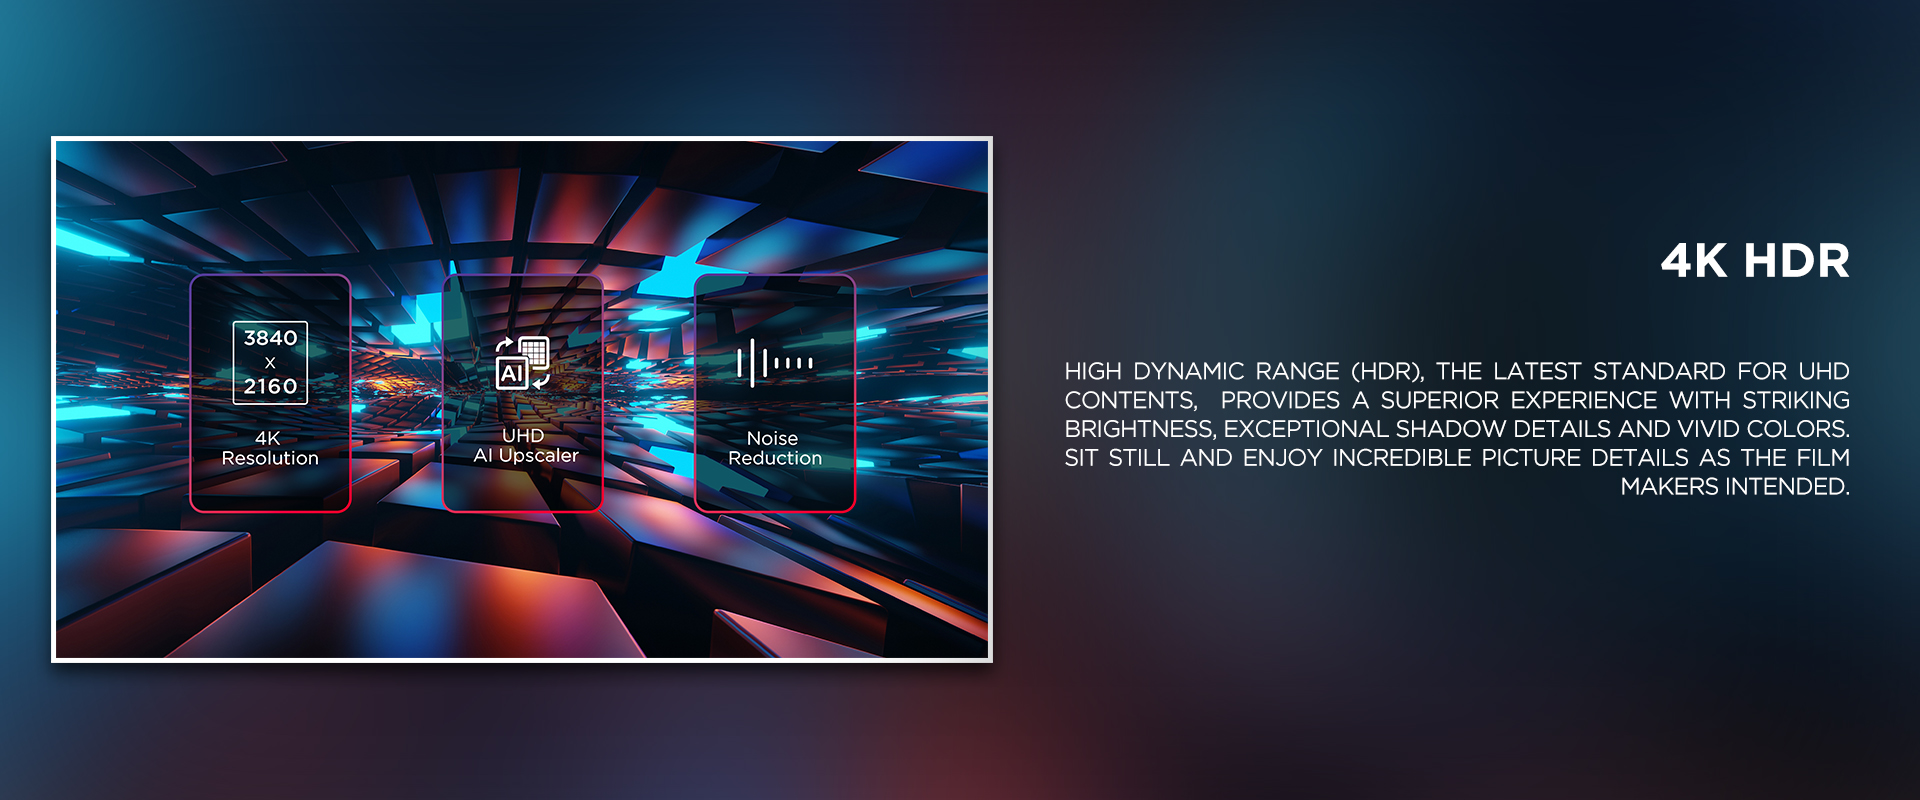 4K HDR - High Dynamic Range (HDR), the latest standard for UHD contents,  provides a superior experience with striking brightness, exceptional shadow details and vivid colors. Sit still and enjoy incredible picture details as the film makers intended.